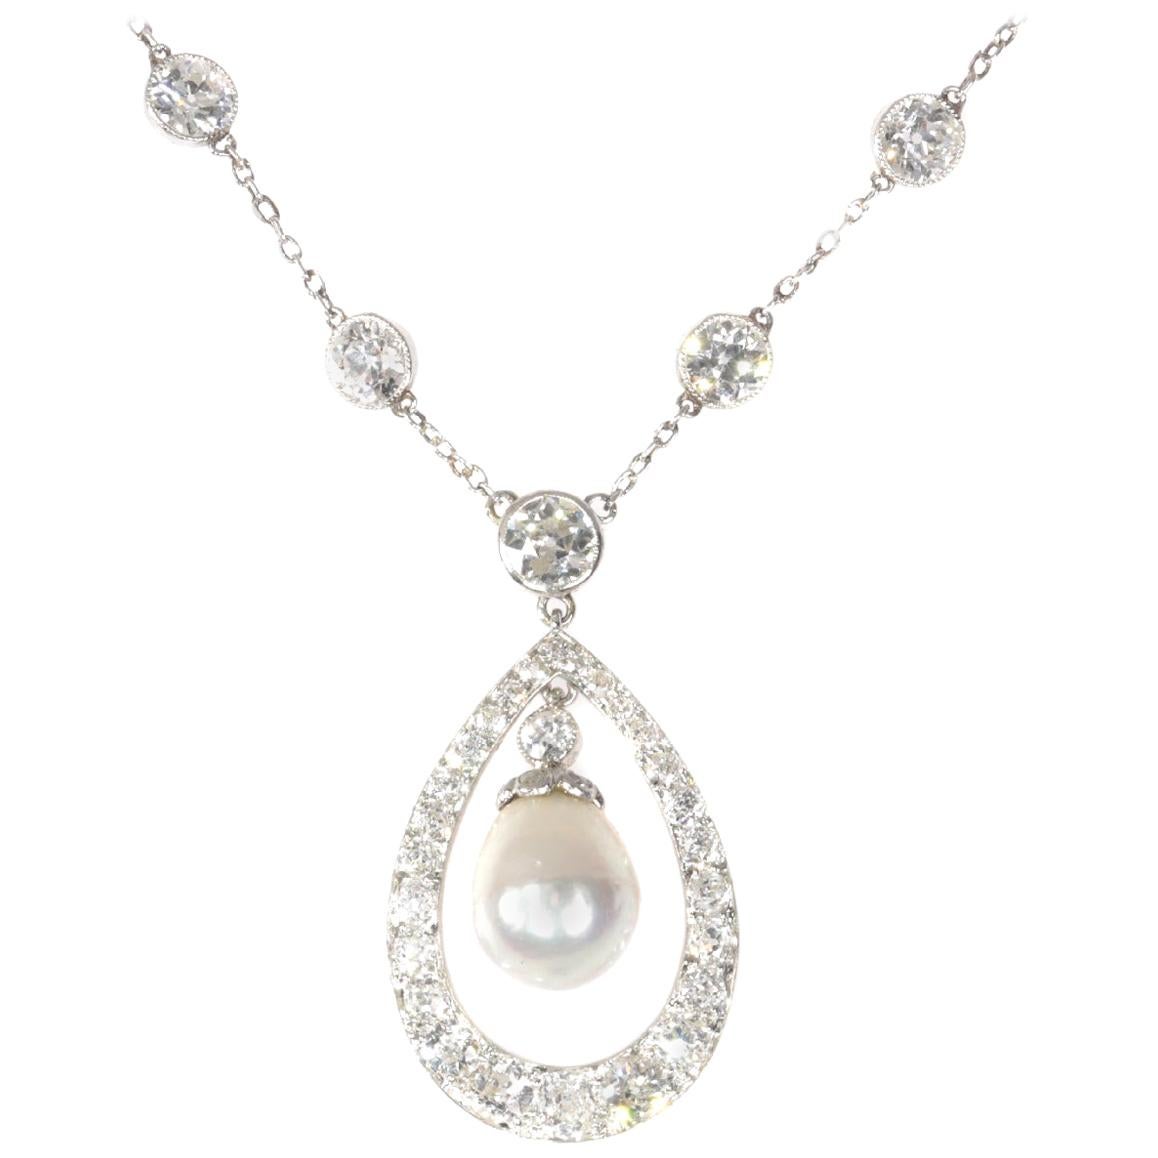 Platinum Art Deco Diamond Necklace with Natural Drop Pearl of 7 Carat, 1930s For Sale